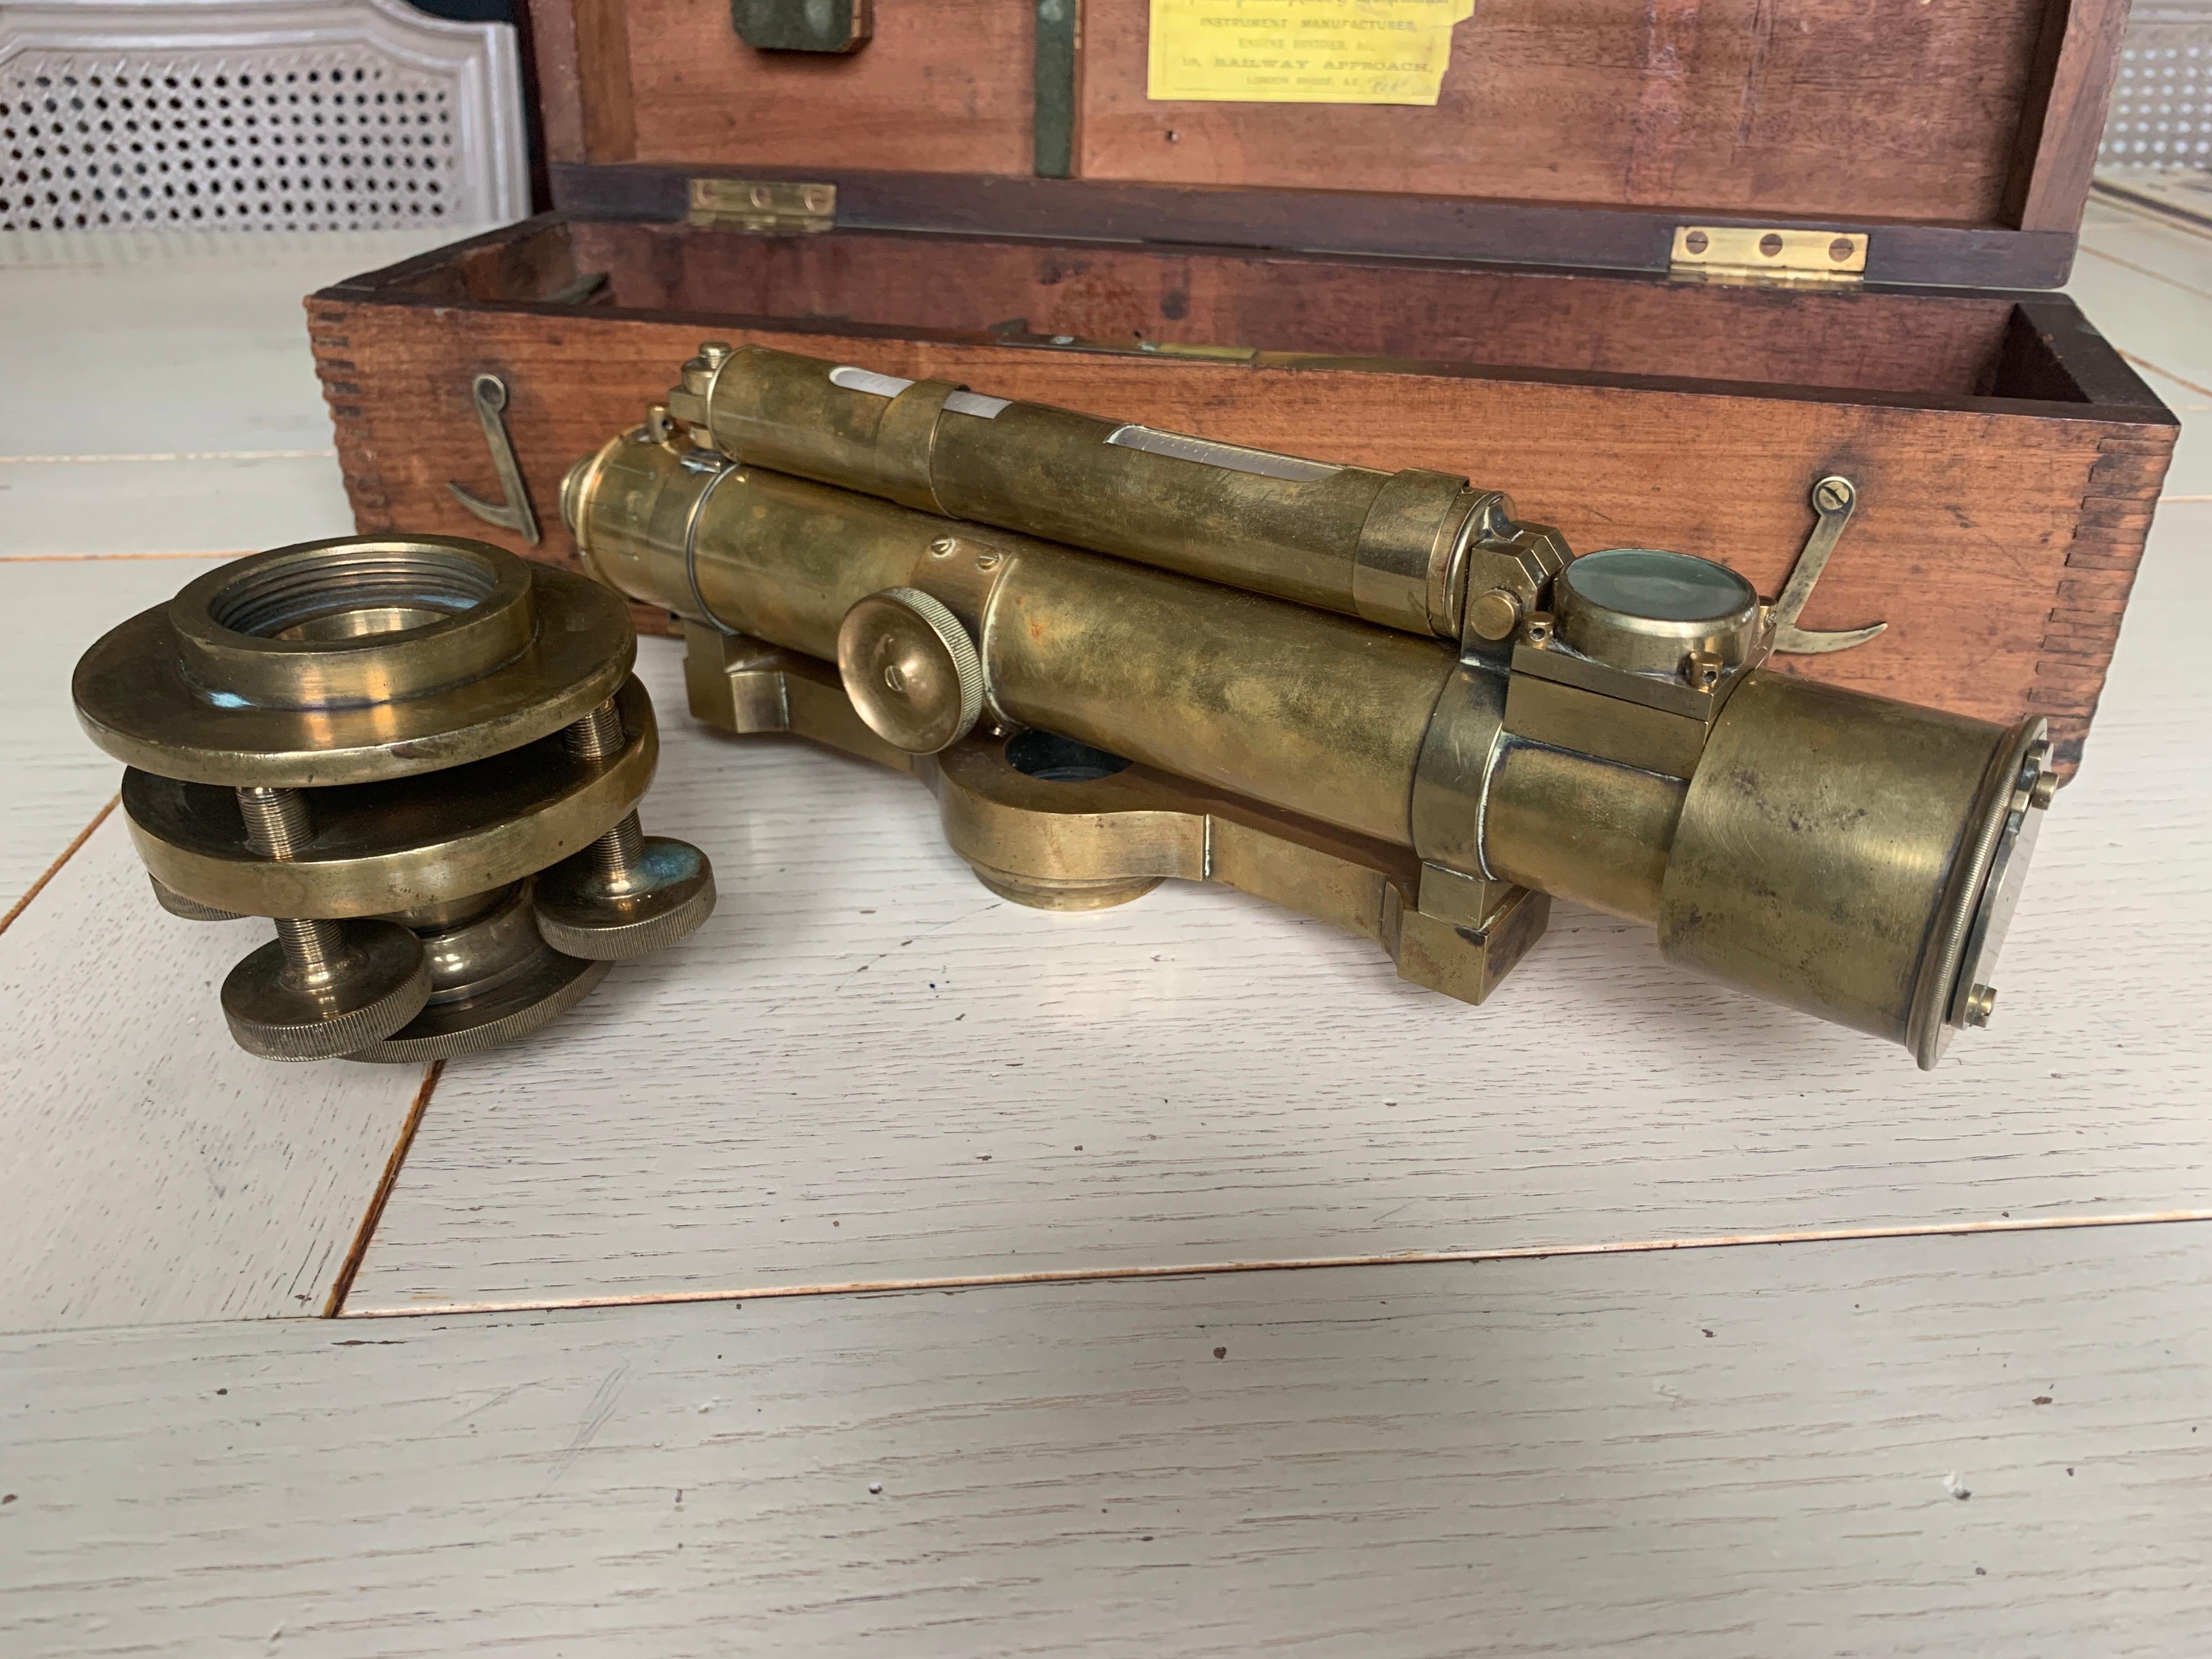 20th century English surveyor's theodolite or transit instrument of brass by W.F. Stanley (Optical, Philosophical & Mathematical Instrument Manufacturer, London), circa 1930, in original fitted wooden box. With attached spirit level on